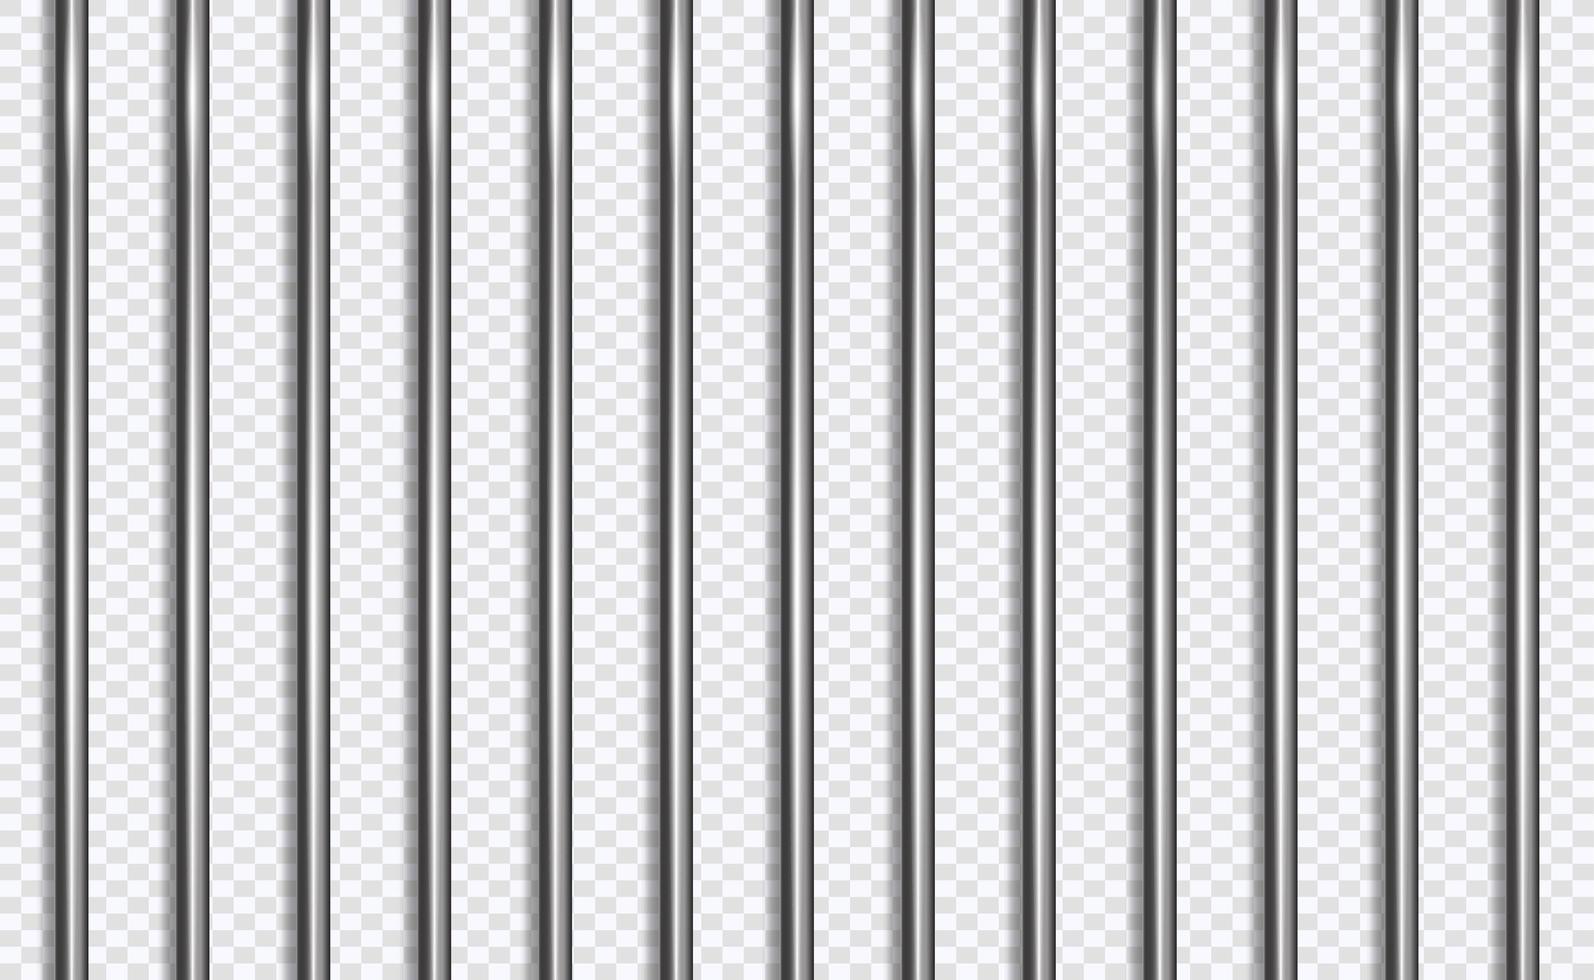 Jail lattice or bars in 3d style on isolated background. Prison vector illustration.